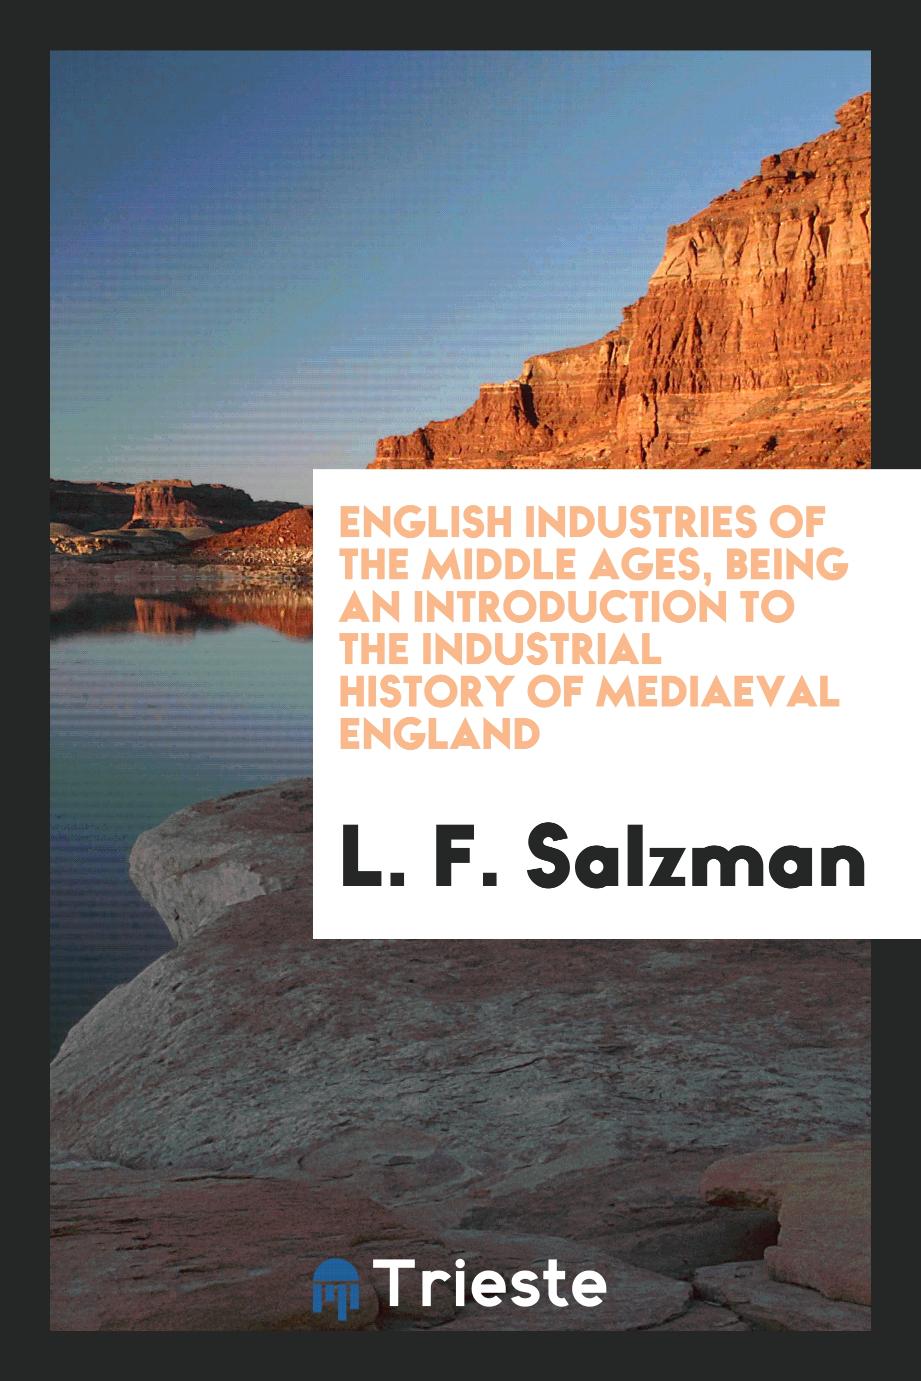 English industries of the Middle Ages, being an introduction to the Industrial history of mediaeval England